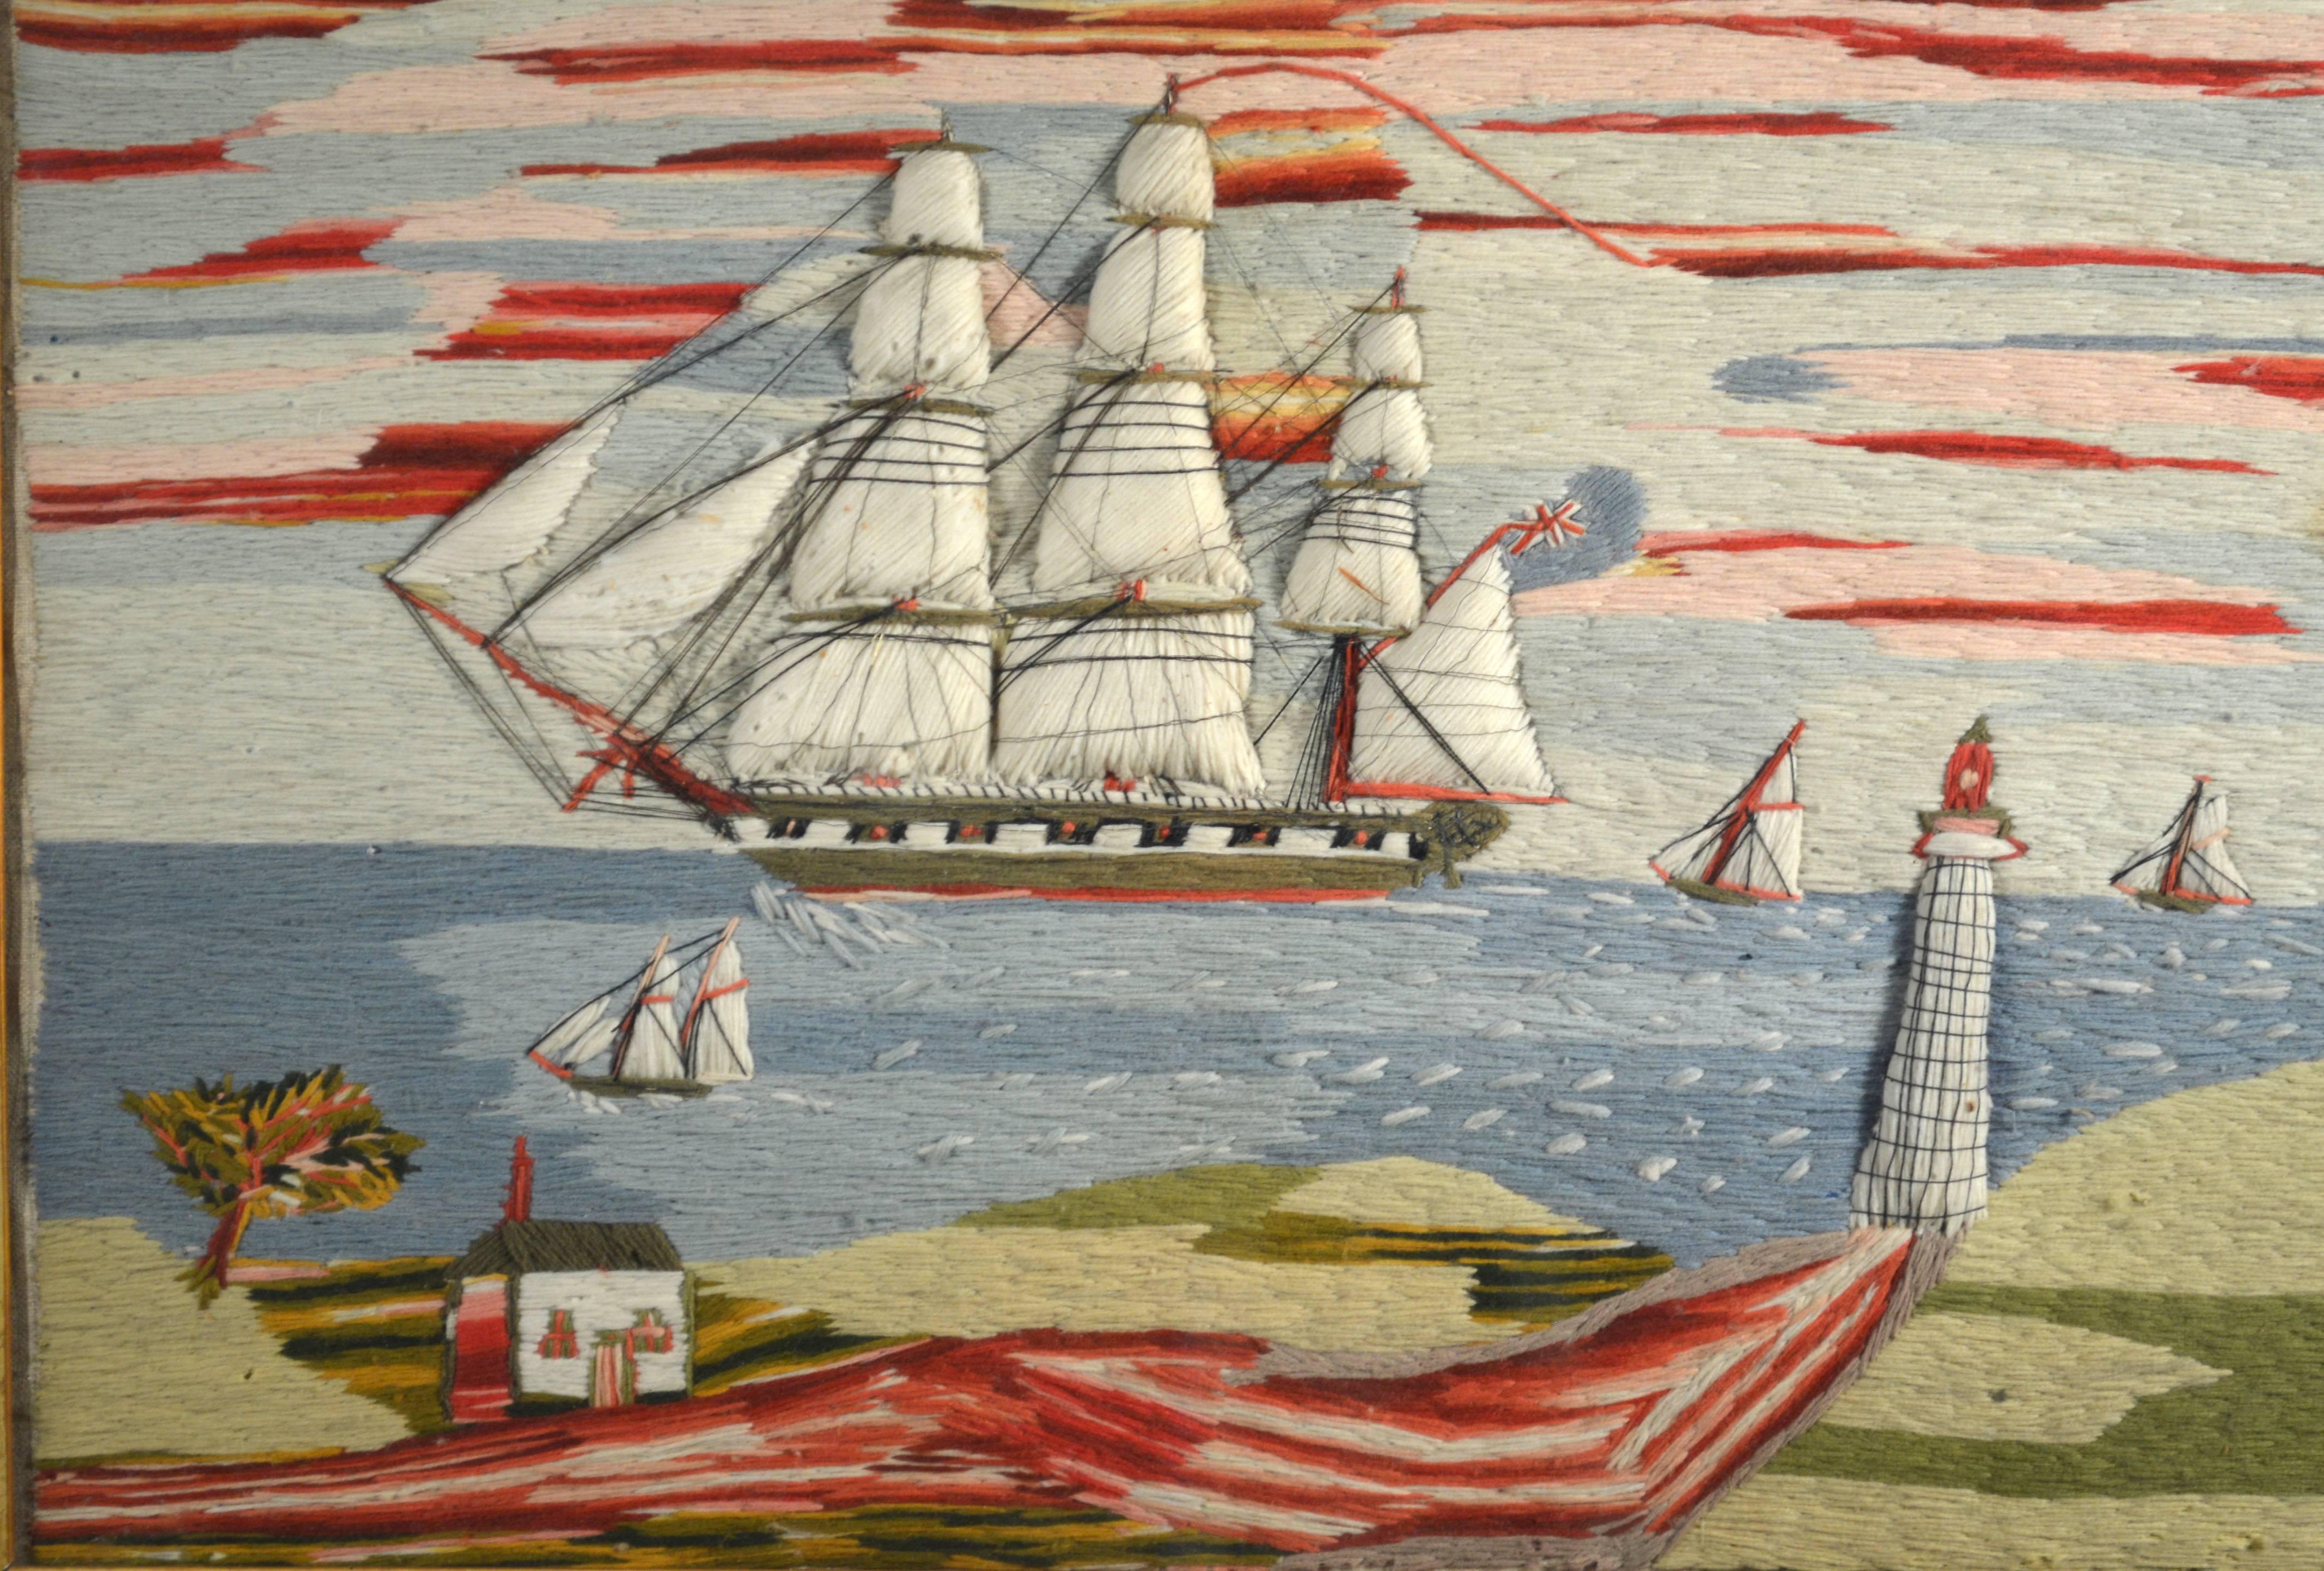 The fabulous and unusual Folk Art sailor's trapunto woolwork is very charming and dramatic depicting a large three-masted ship passing close-in to shore with other small vessels nearby. The shoreline shows a trapunto lighthouse and a muddy path